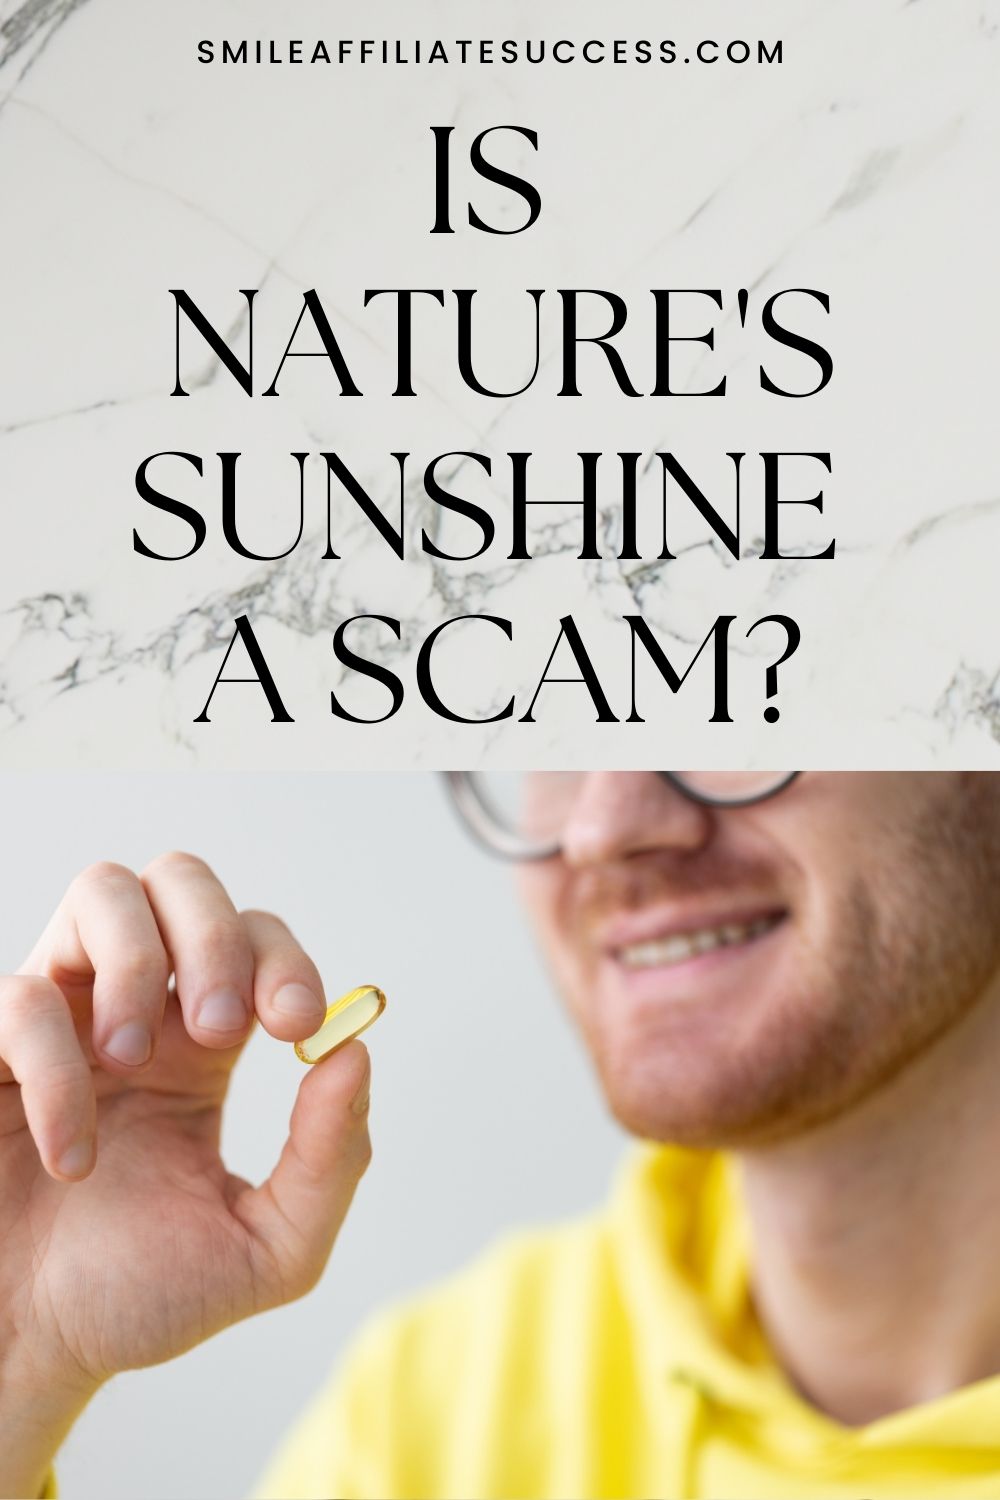 What Is Nature’s Sunshine About?